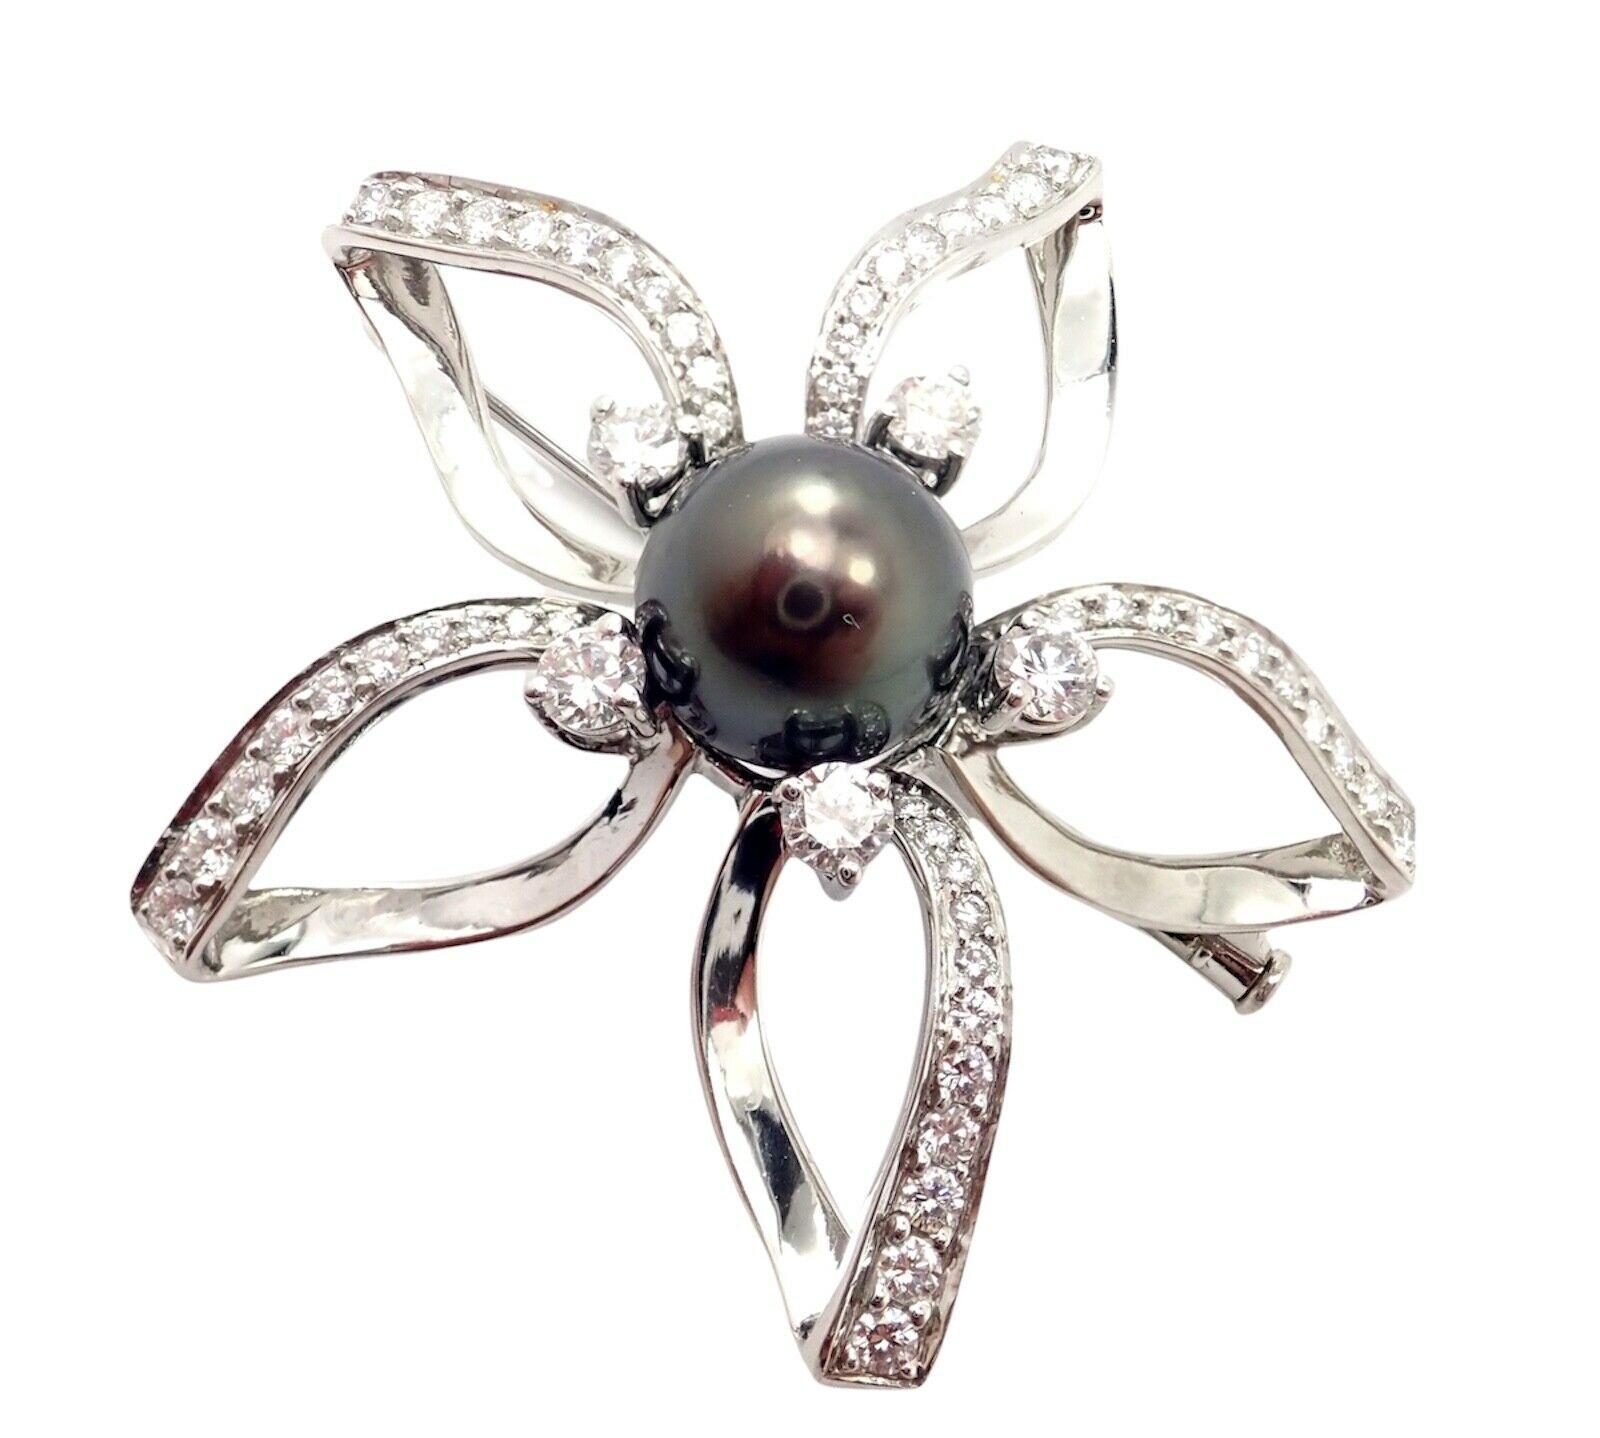 Platinum Diamond and Large Tahitian Pearl Flower Pin Brooch by Mikimoto. 
With 60 Round brilliant cut diamonds VS1 Clarity, G color 
total weight approximate 1.50ct
1 High Luster Black Tahitian South Sea Pearl 11mm in Size
Details: 
Measurements: